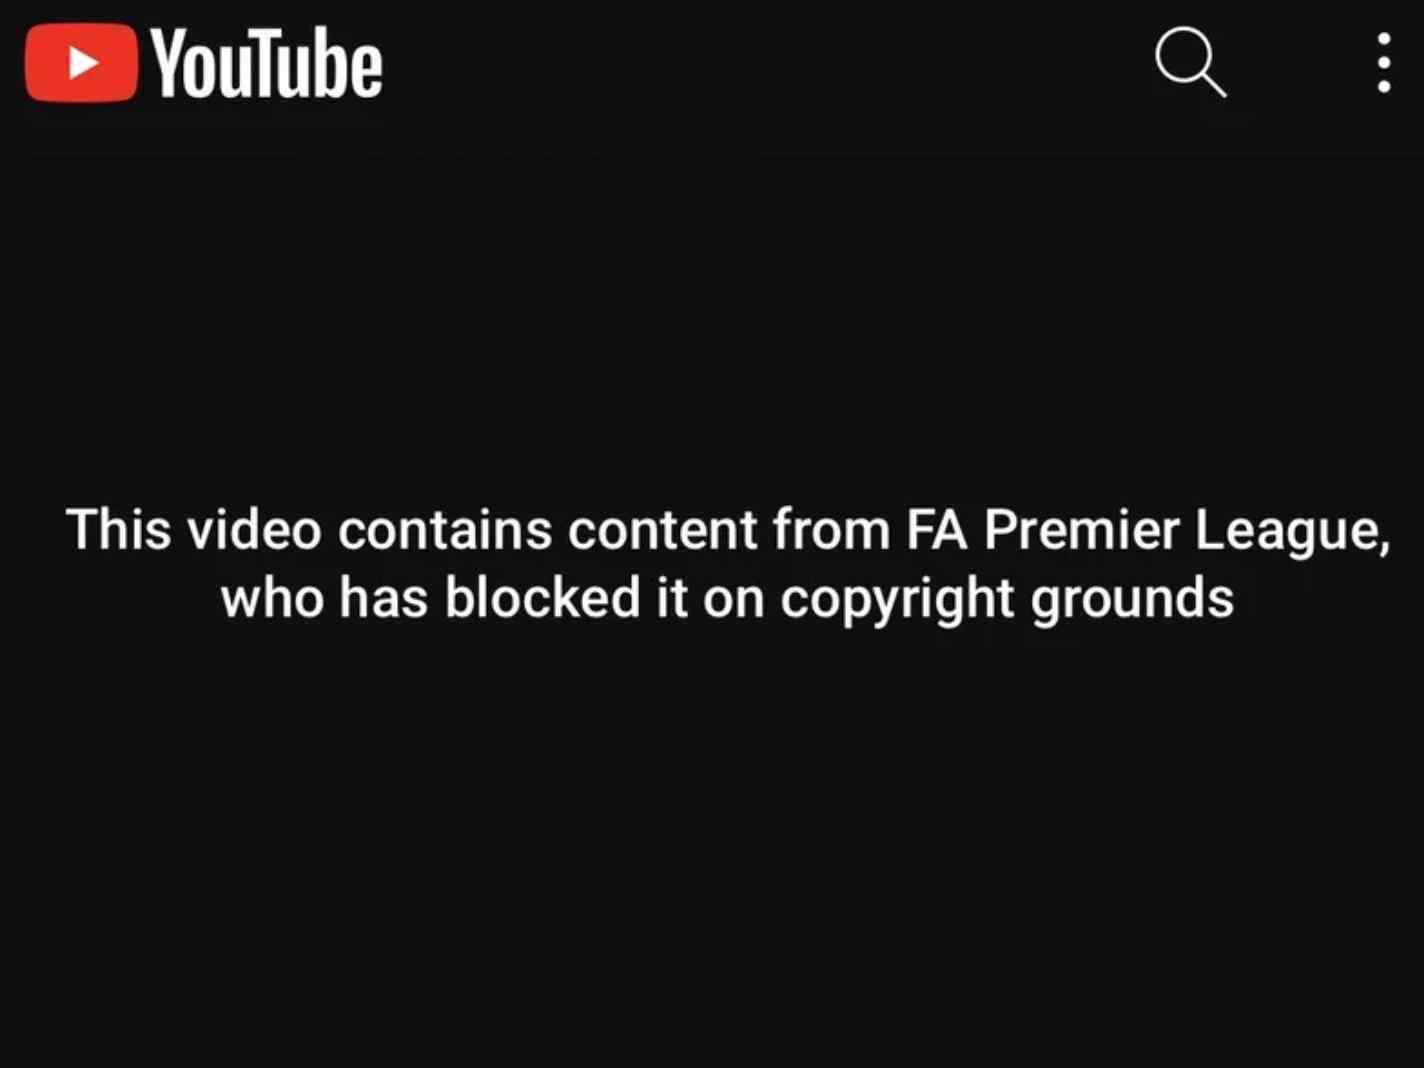 PL Backtrack After Uproar Over DMCA Takedown of Sidemen Charity Match on YouTube